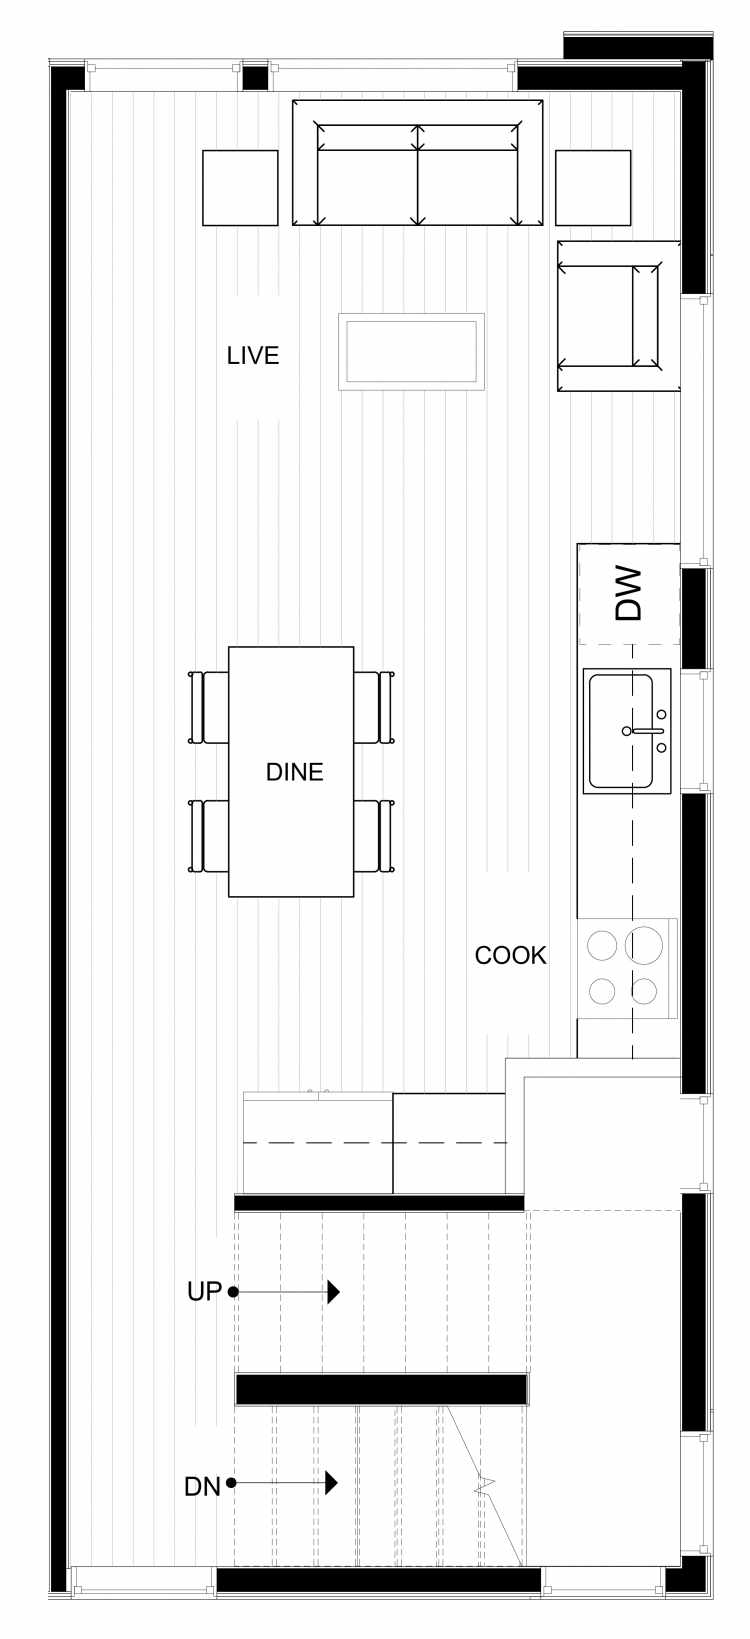 Third Floor Plan of 1539 Grandview Pl E, One of the Larrabee Townhomes in Capitol Hill